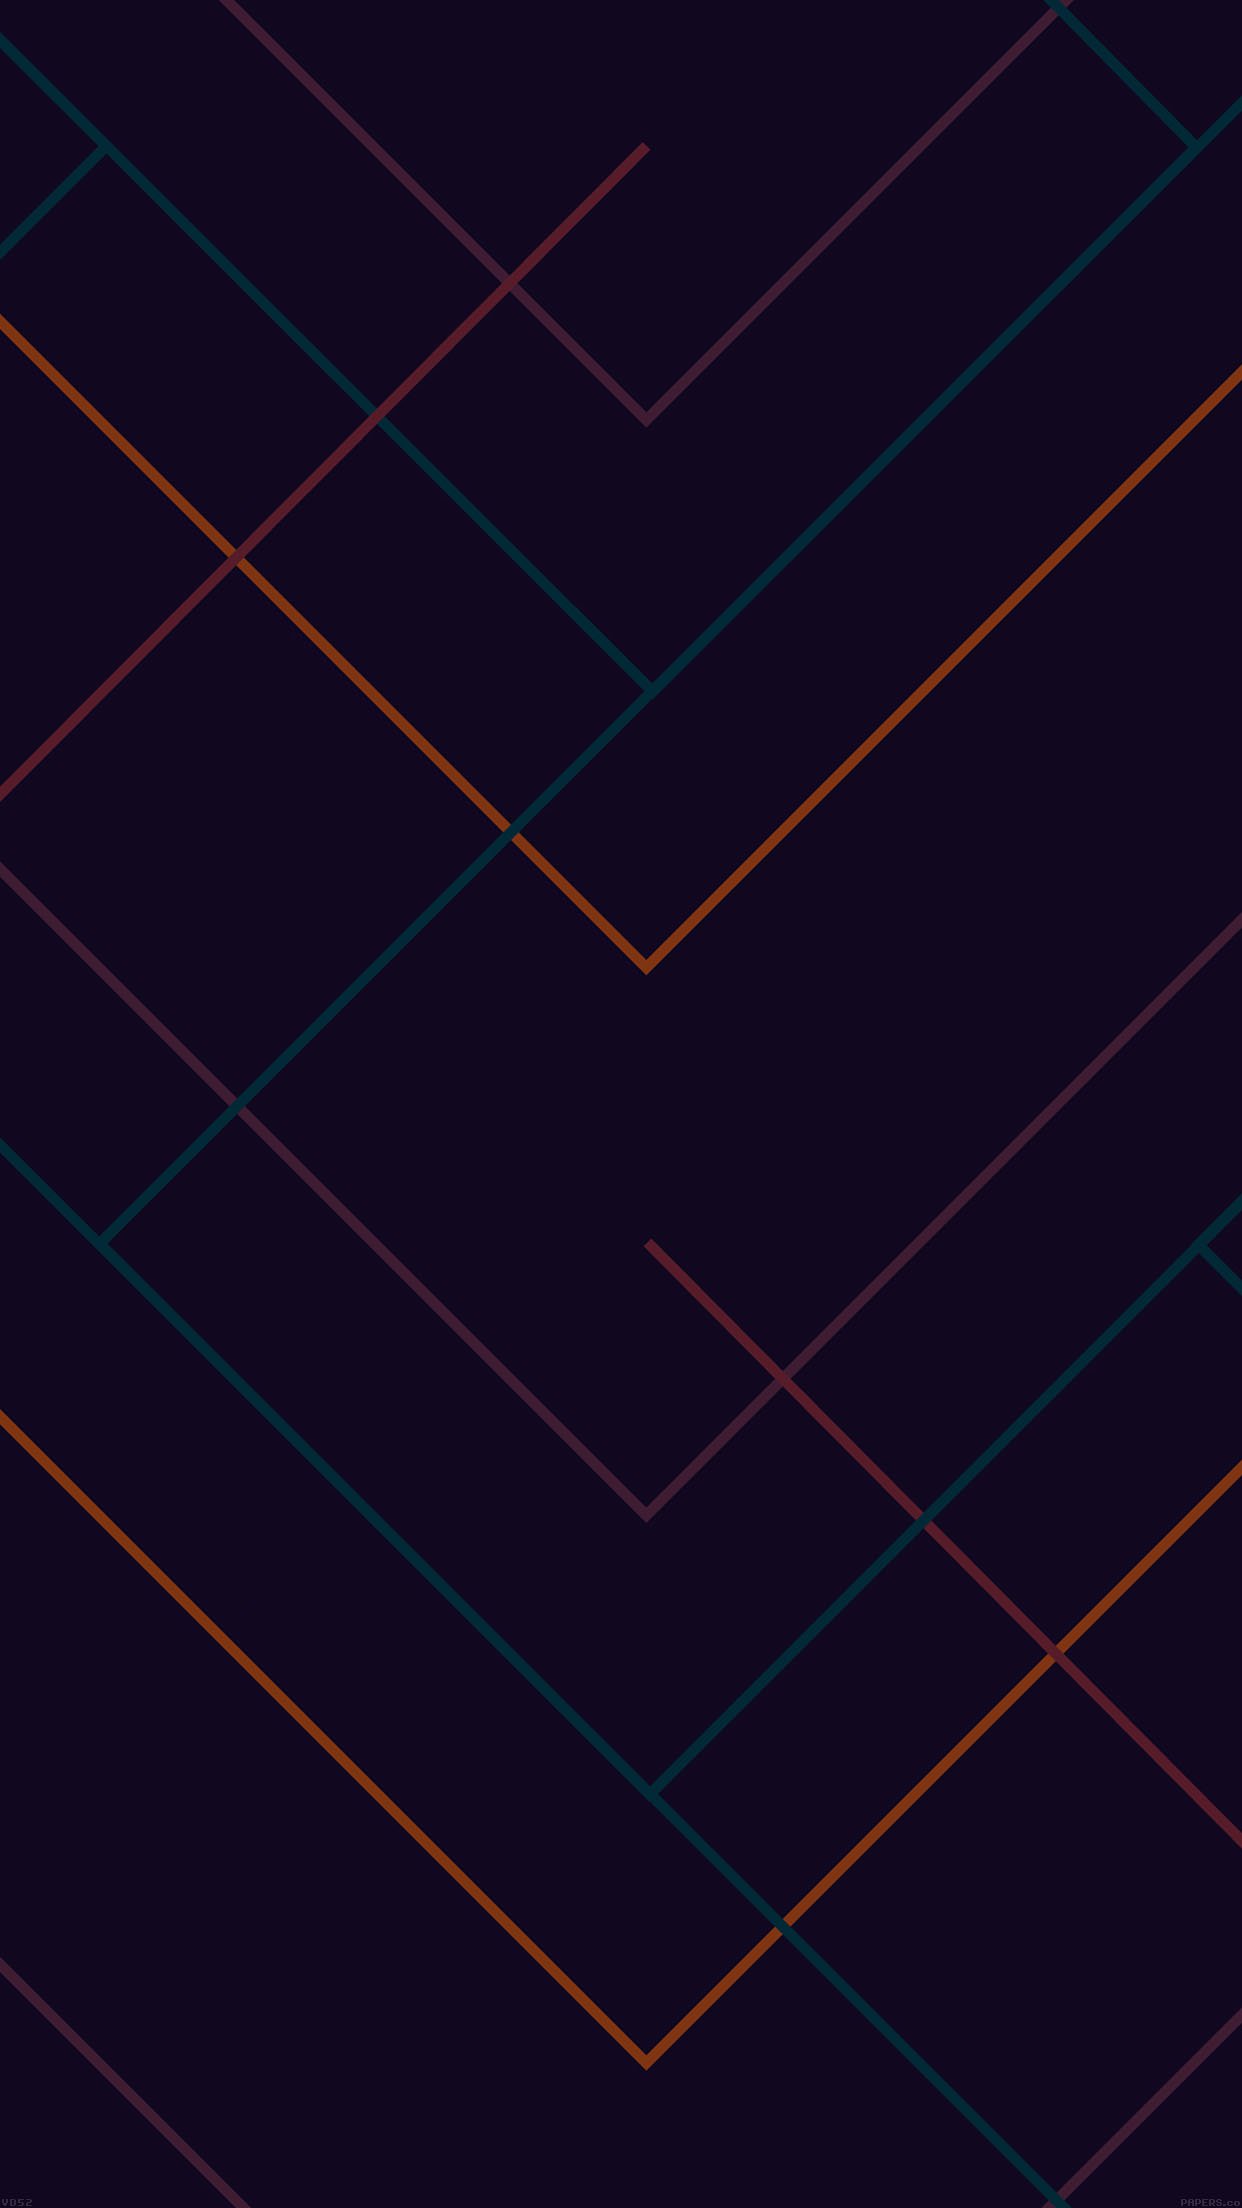 Abstract Dark Geometric Line Pattern Android wallpaper